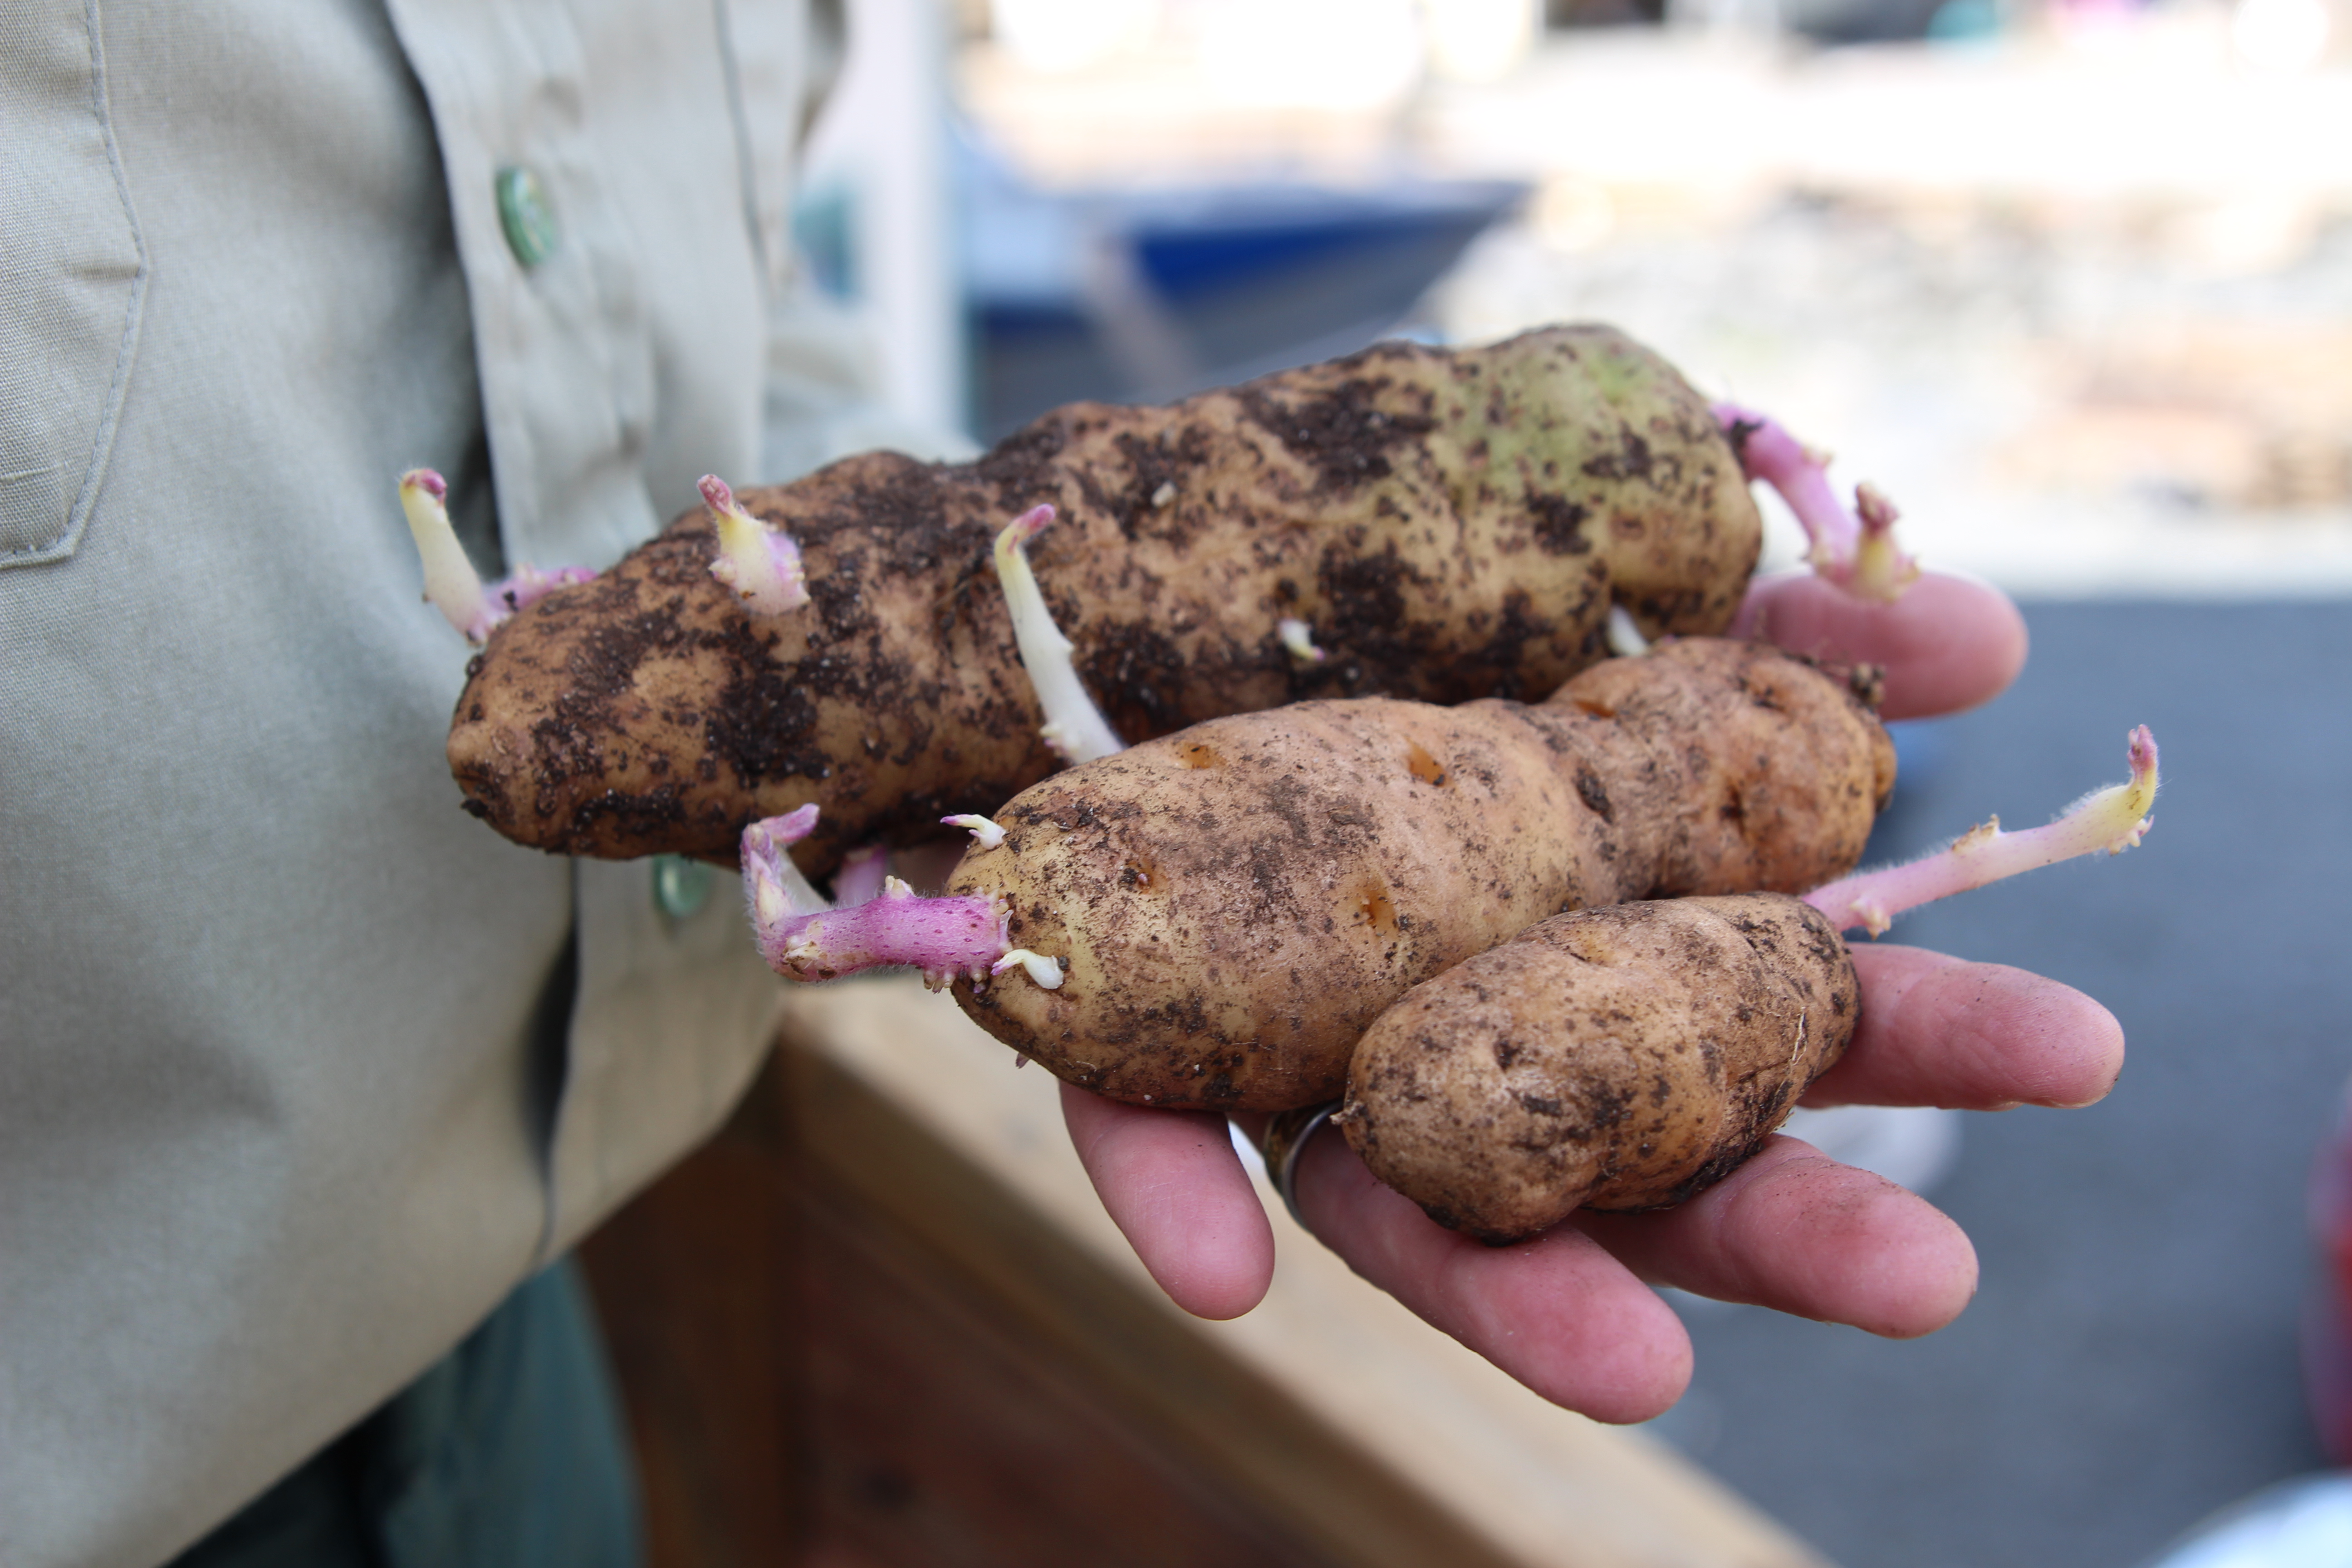 Michelle Putz displays a handful of Maria’s potatoes. (Photo by Katherine Rose/KCAW)